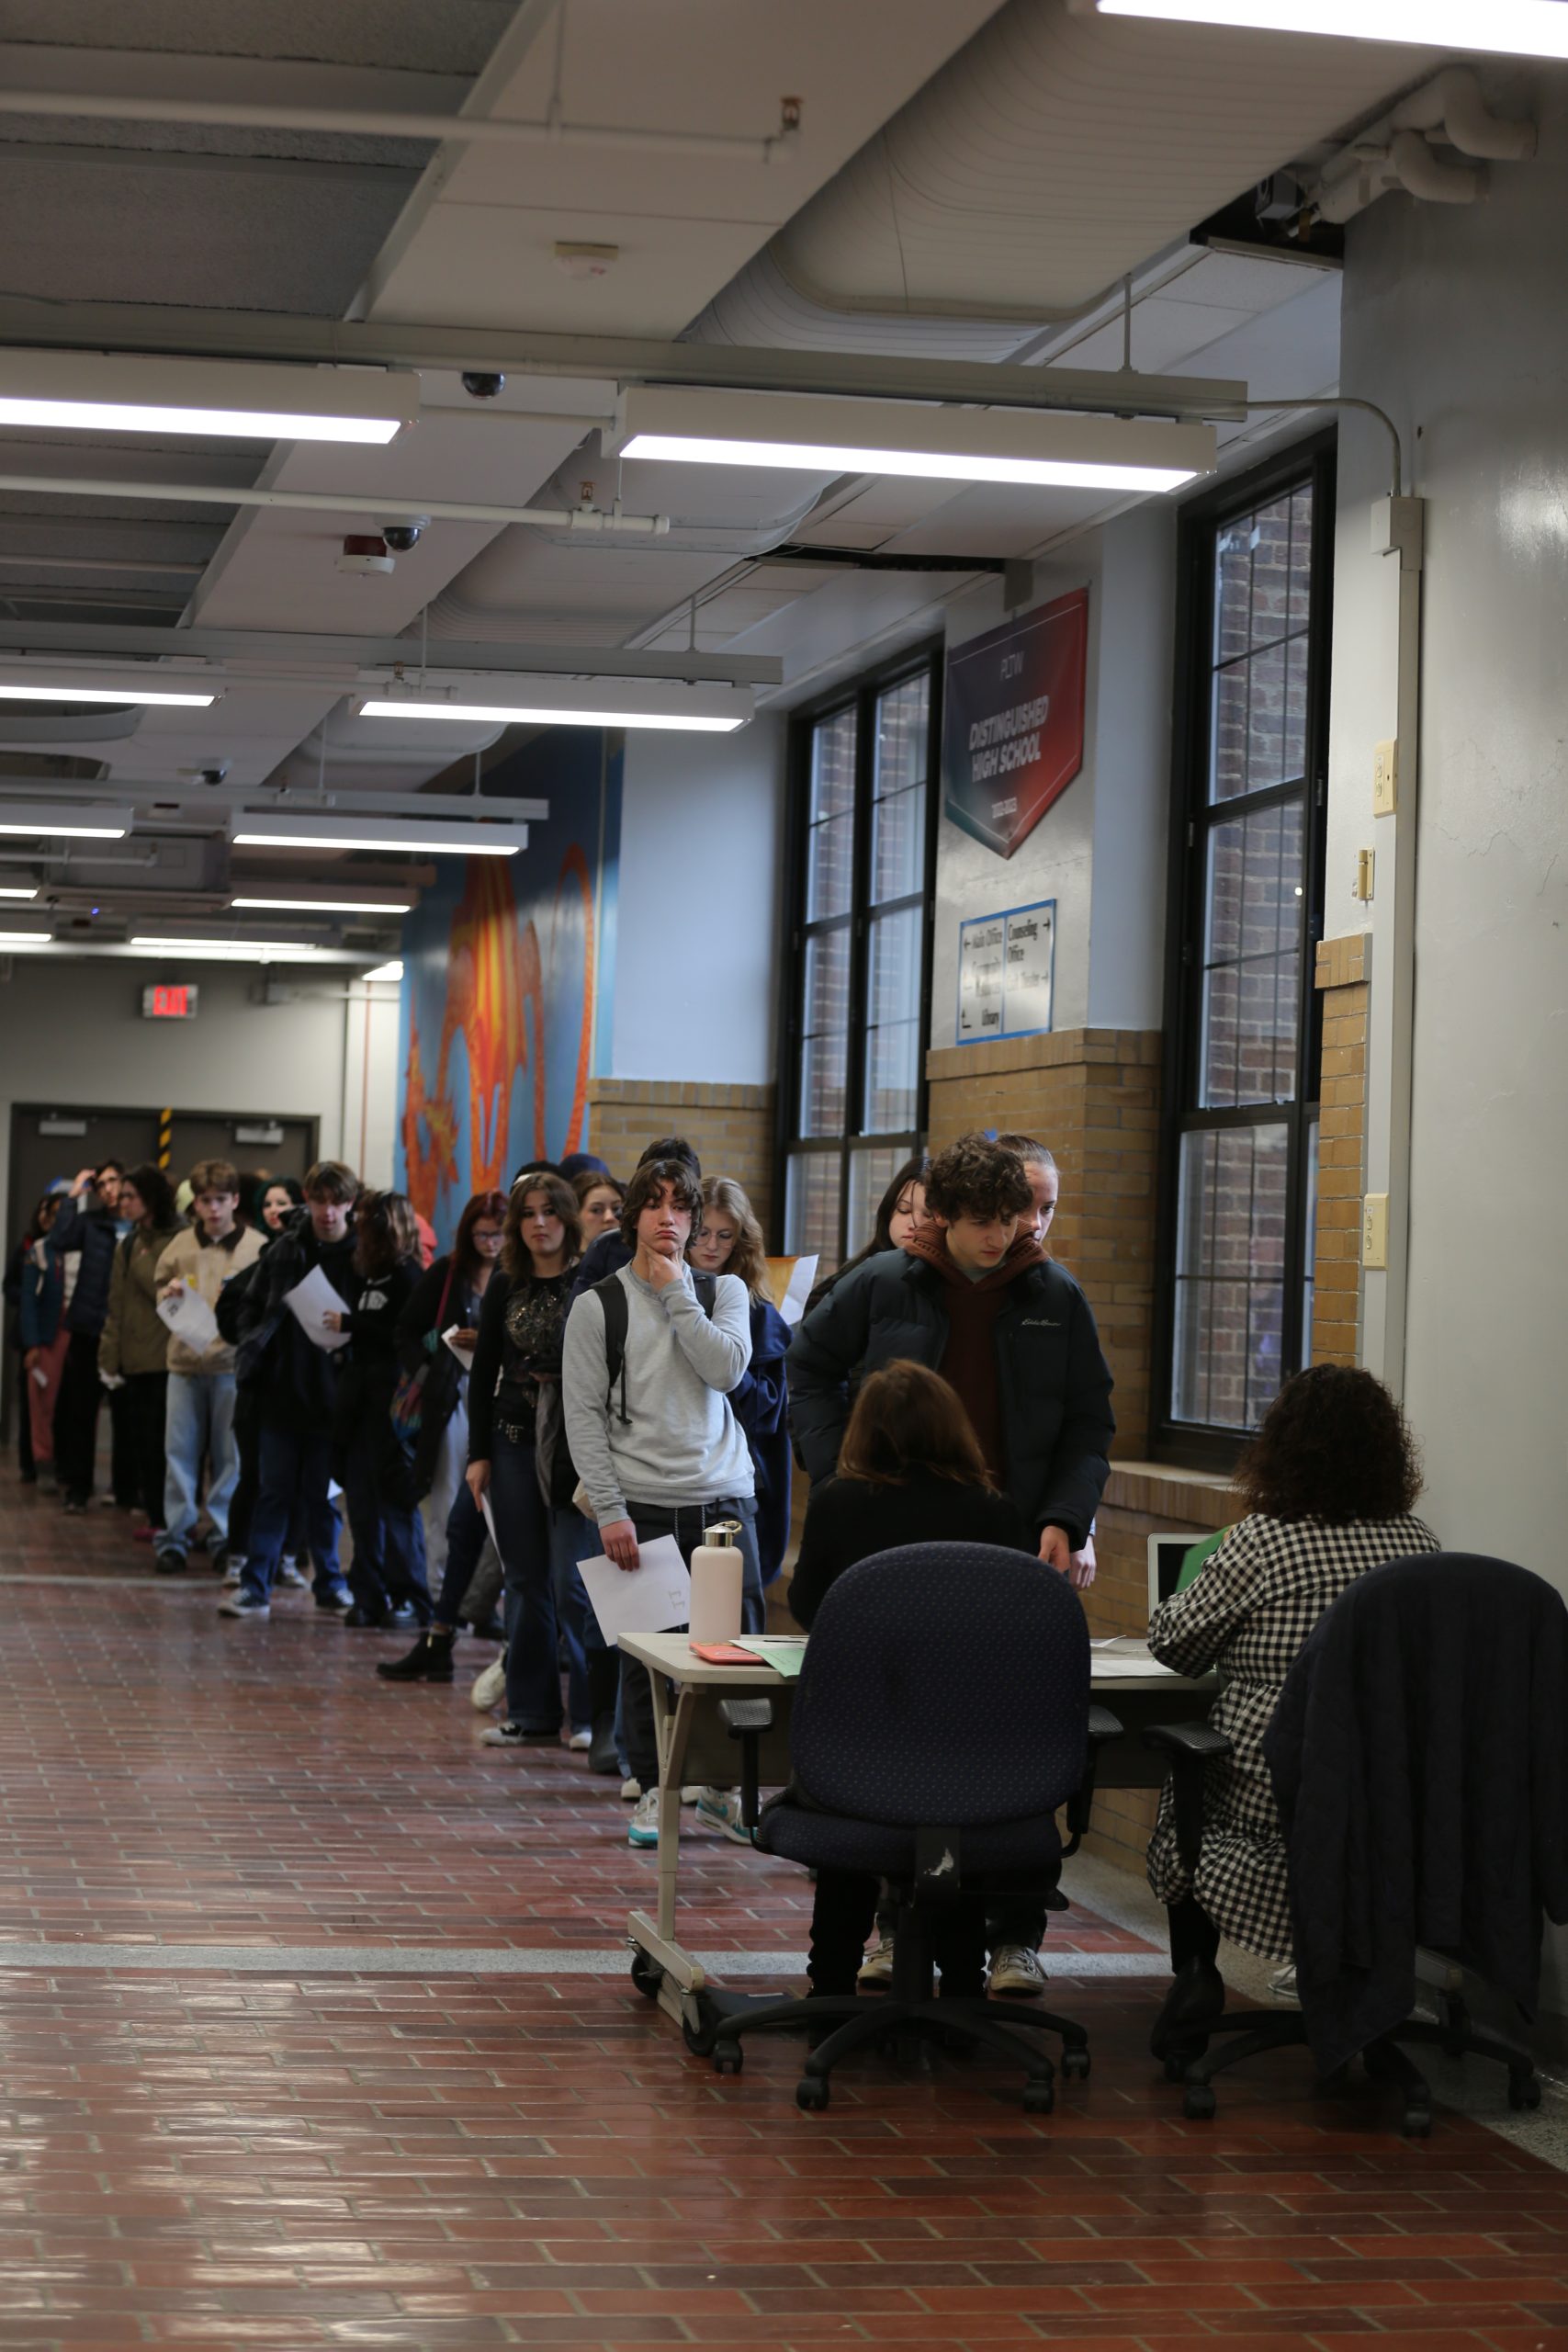 Students line up outside craft theater waiting for their turn to sign up for semester 2 classes. Junior Desmond Lorenz believes planning ahead is the key to coming out of registration with a schedule you are happy with. “I talked to a teacher beforehand, just to see if there was any way I could get a spot in the class, Lorenz said. “But you know, thats just trying to plan ahead because I had a higher number of 107.”